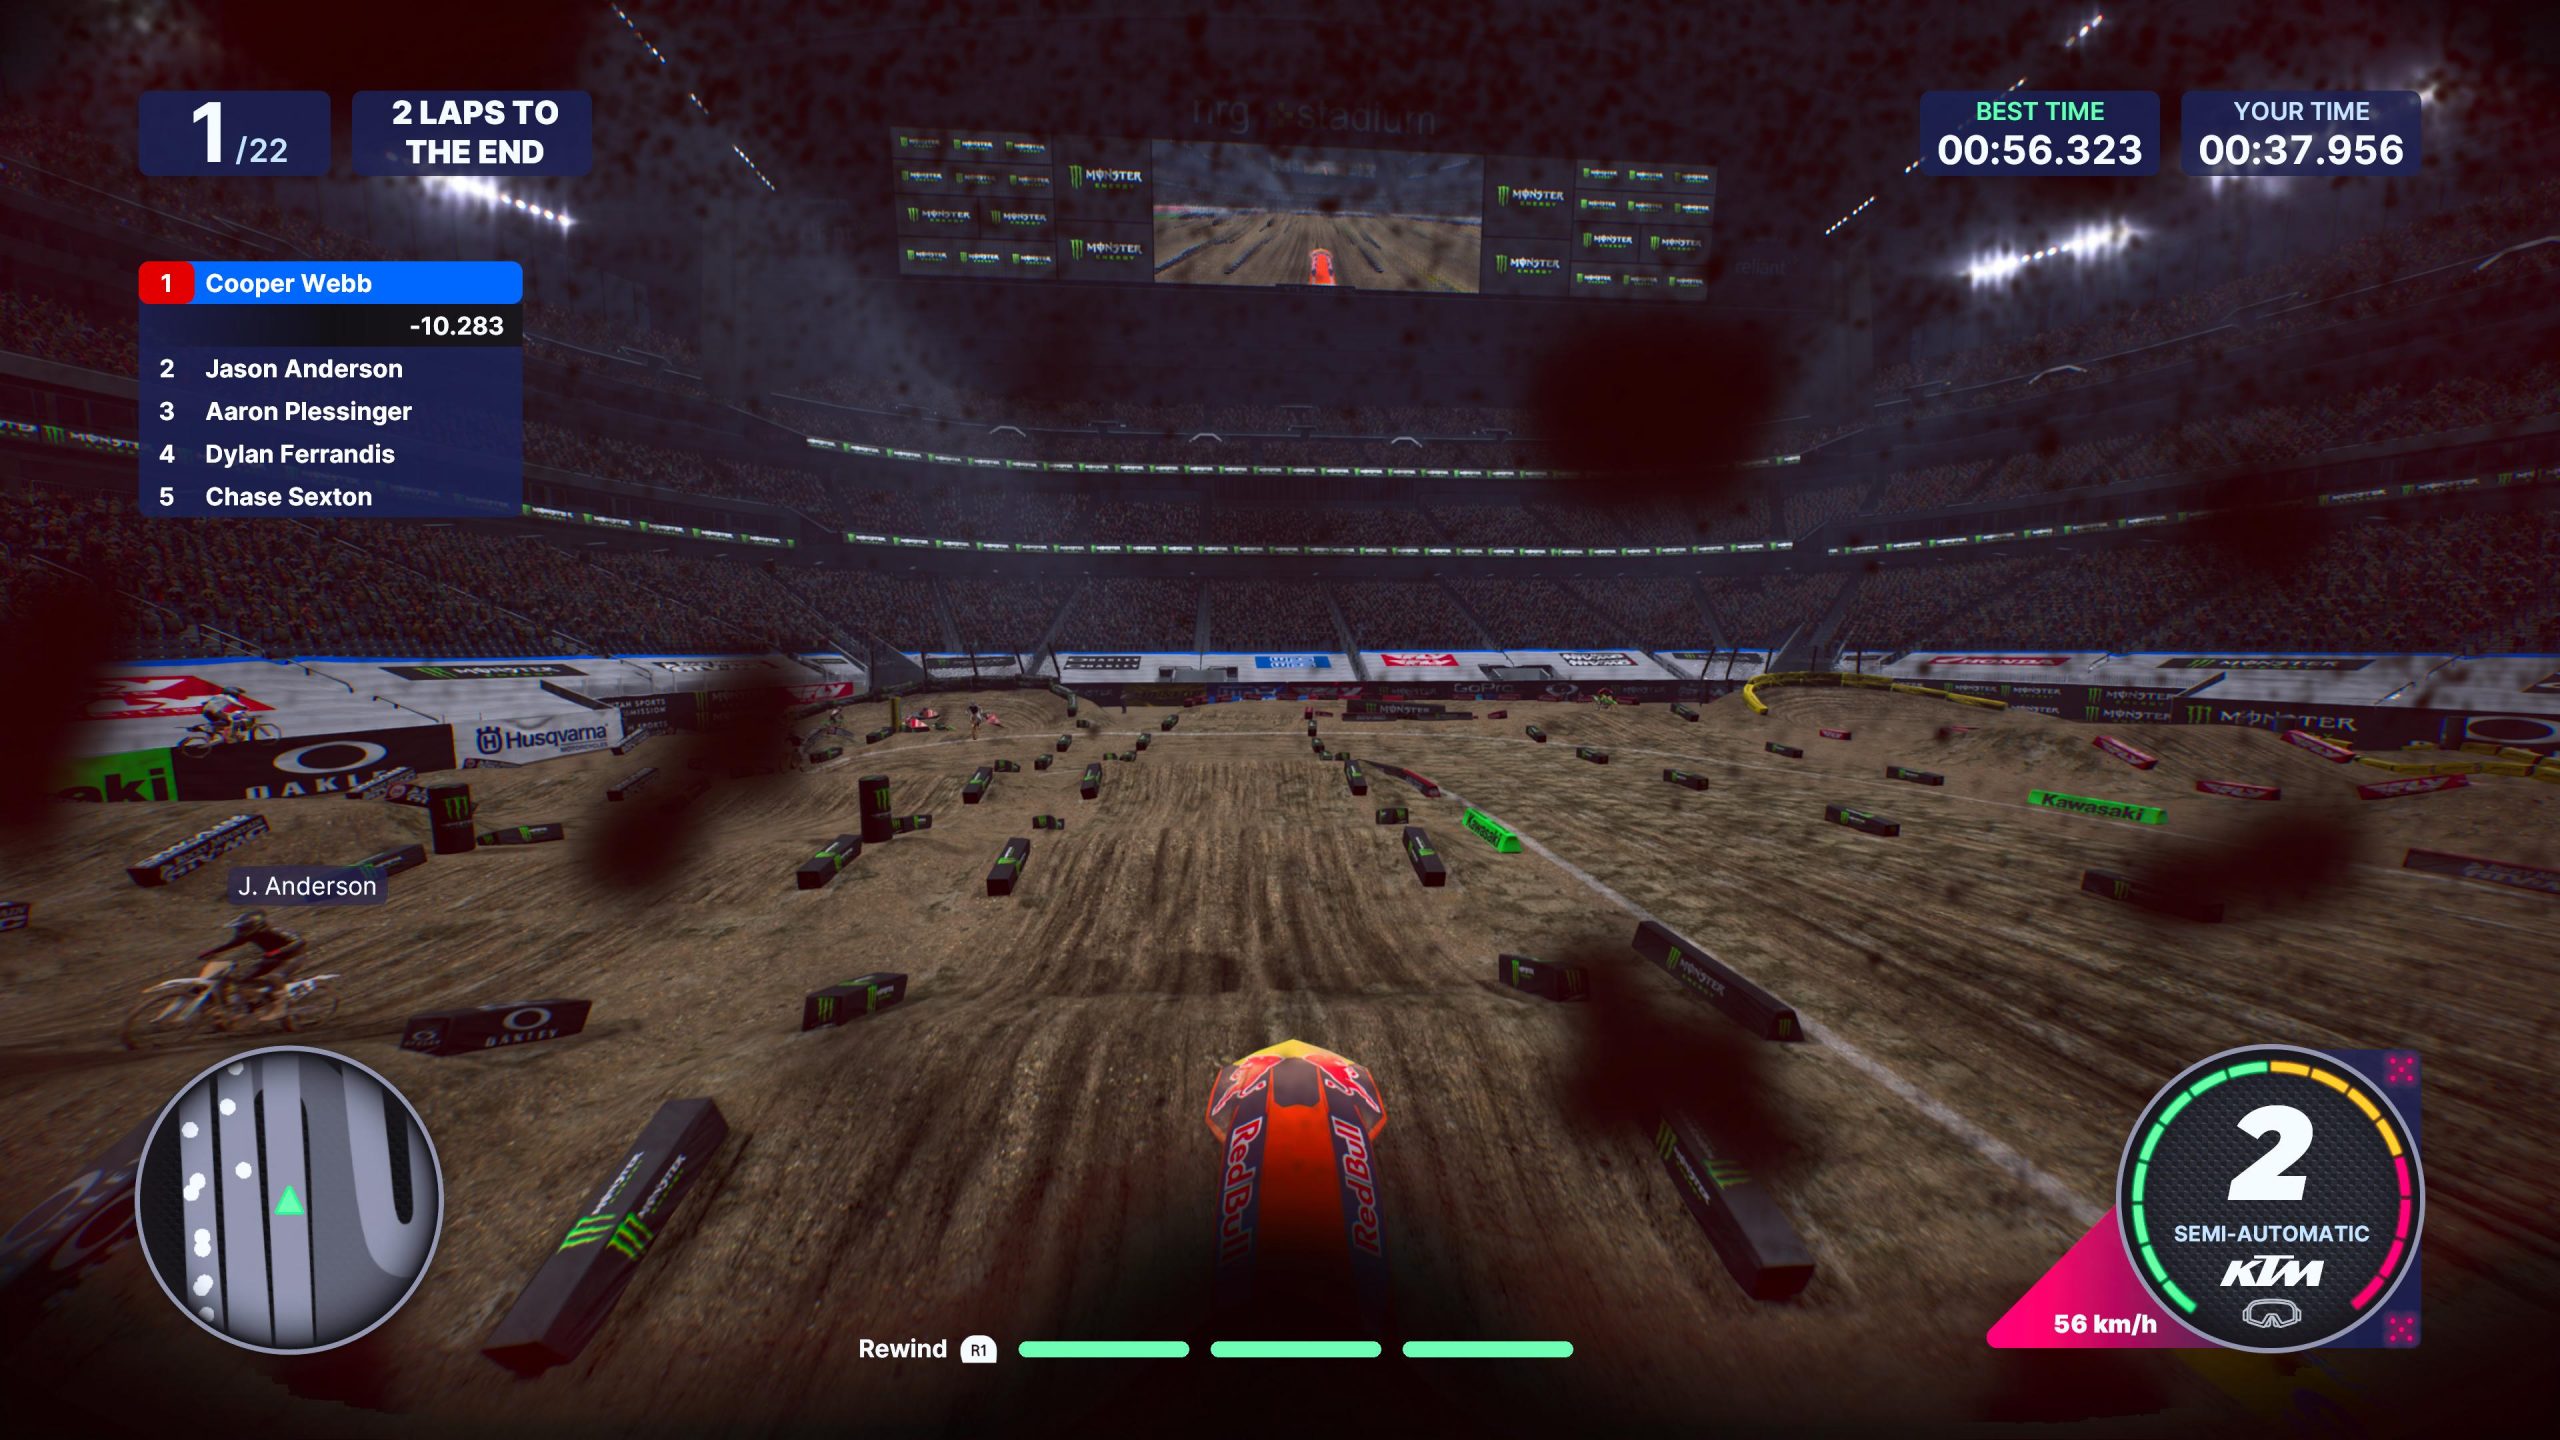 Monster Energy Supercross 5 first person view